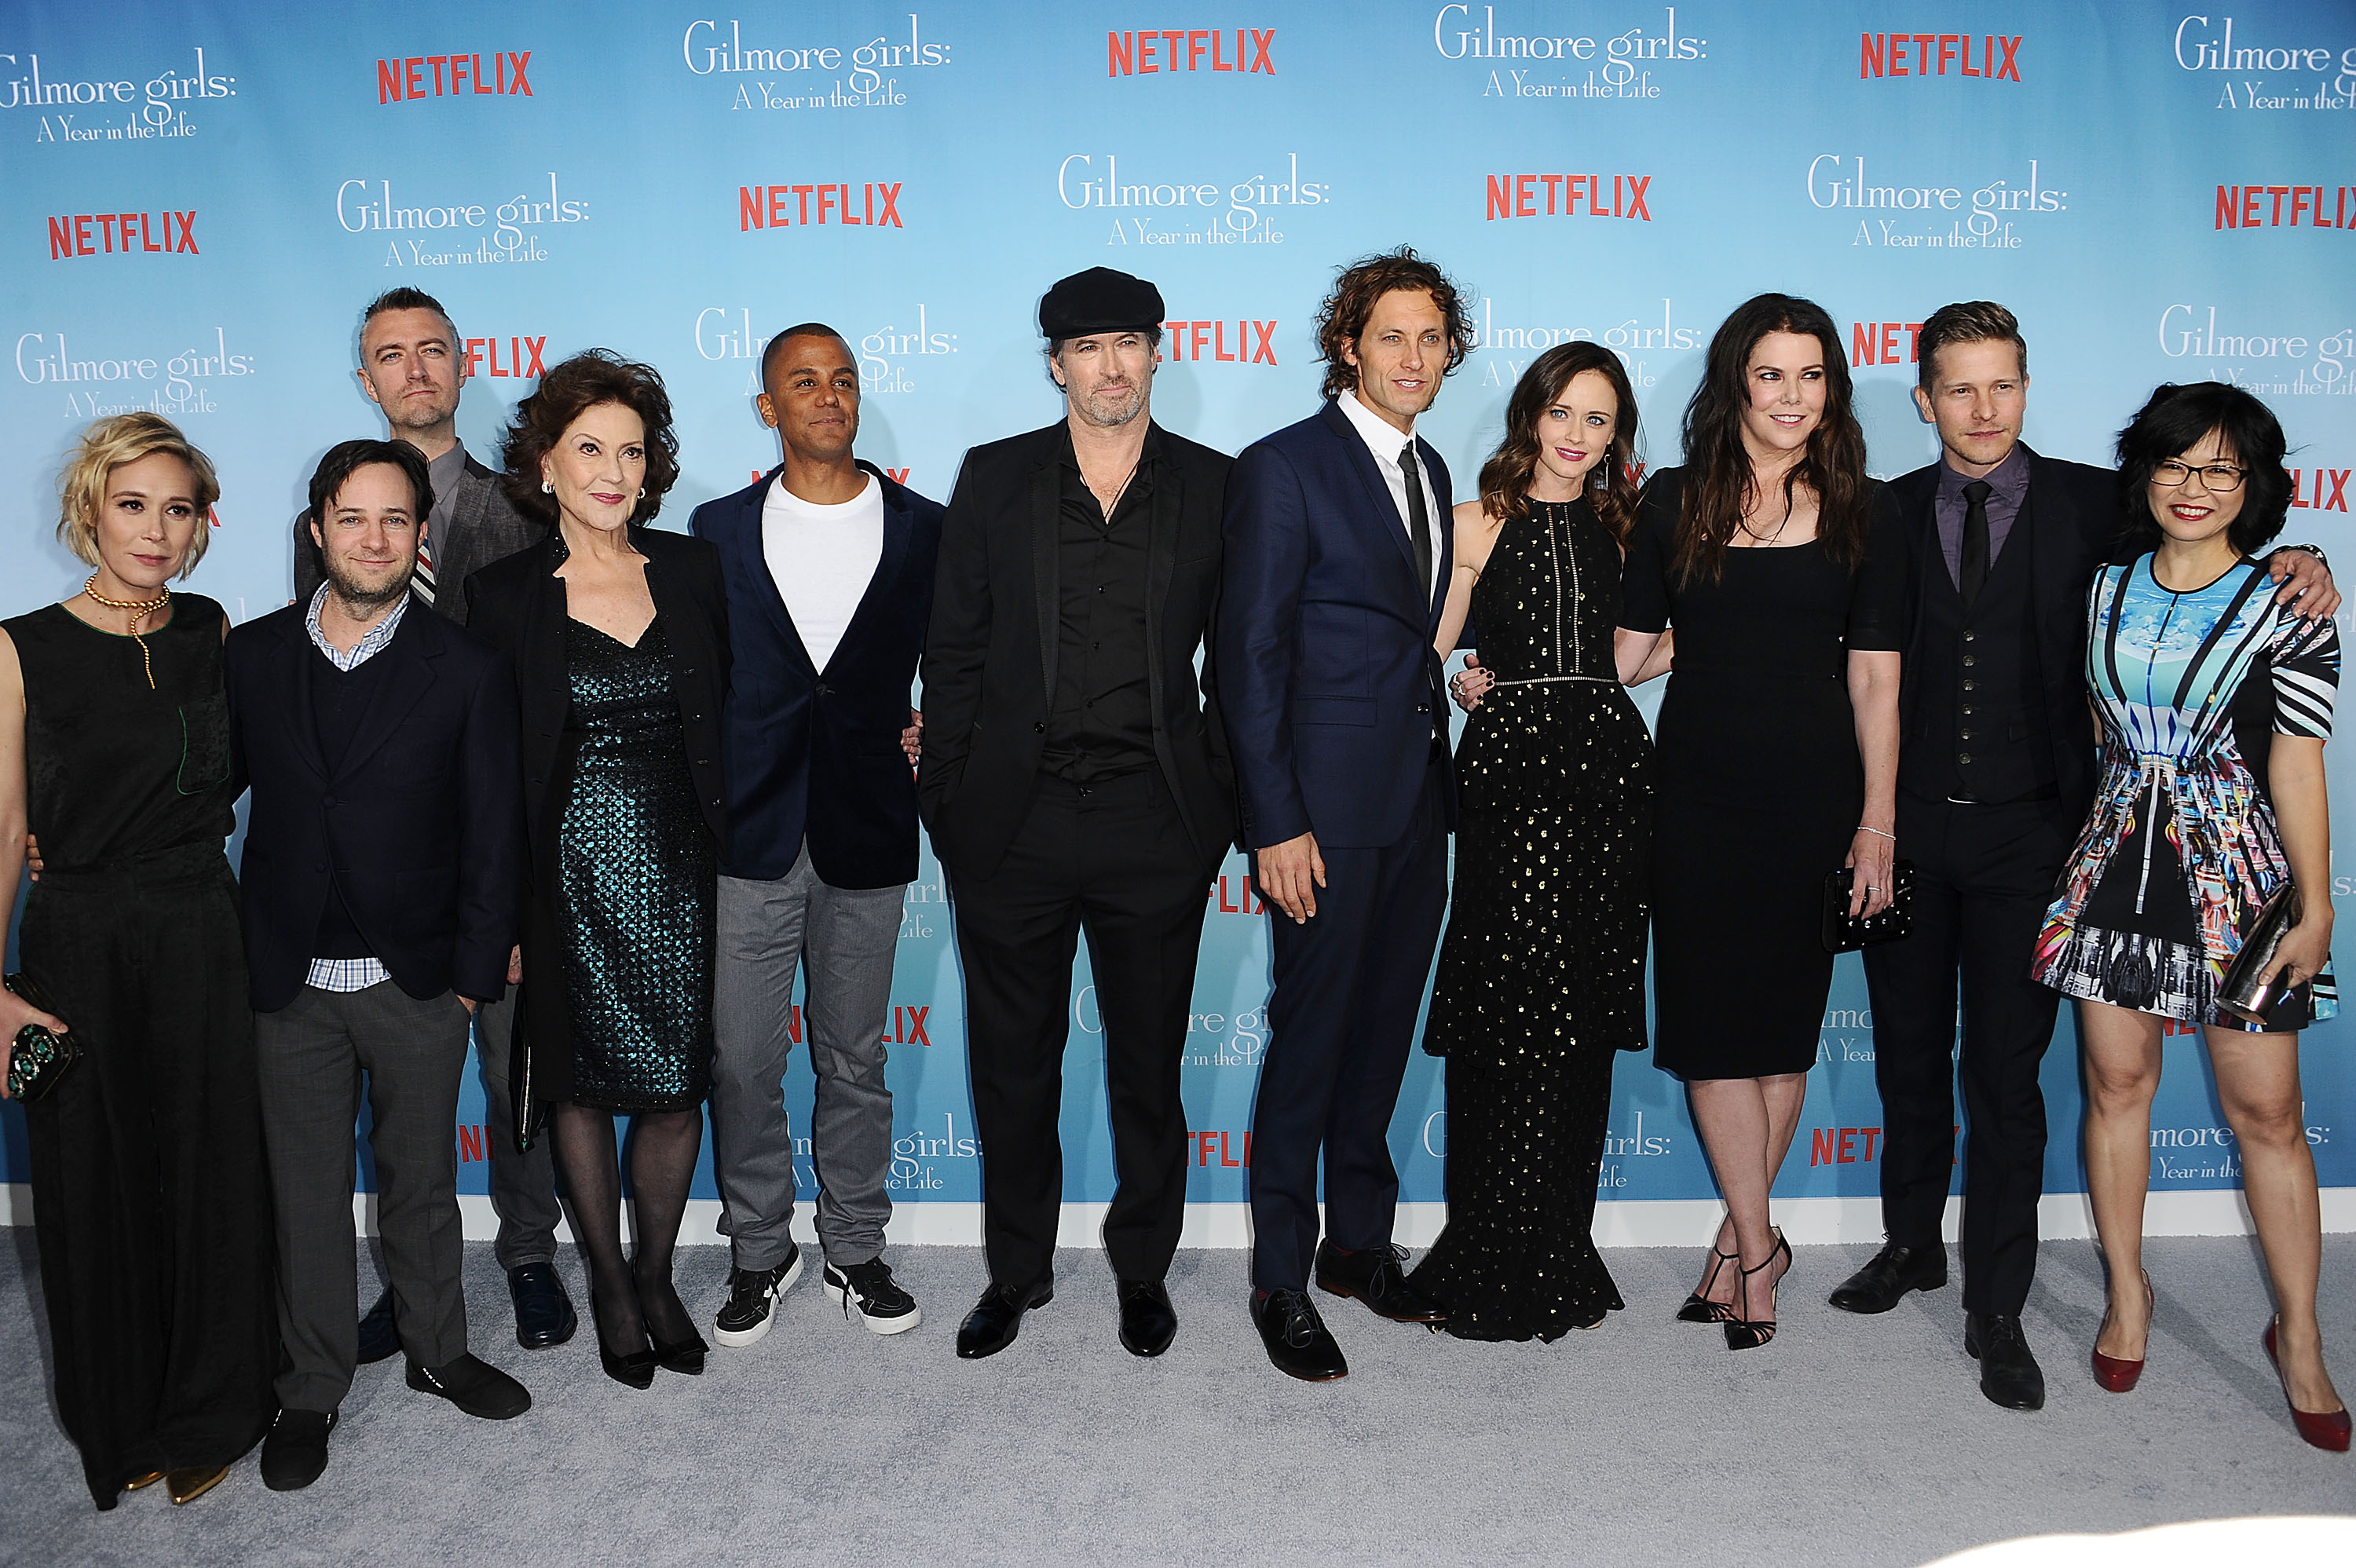 Liza Well, Danny Strong, Sean Gunn, Kelly Bishop, Yanic Truesdale, Scott Patterson, Tanc Sade, Alexis Bledel, Lauren Graham, Matt Czuchry and Keiko Agena attend the premiere of "Gilmore Girls: A Year in the Life" at Regency Bruin Theatre